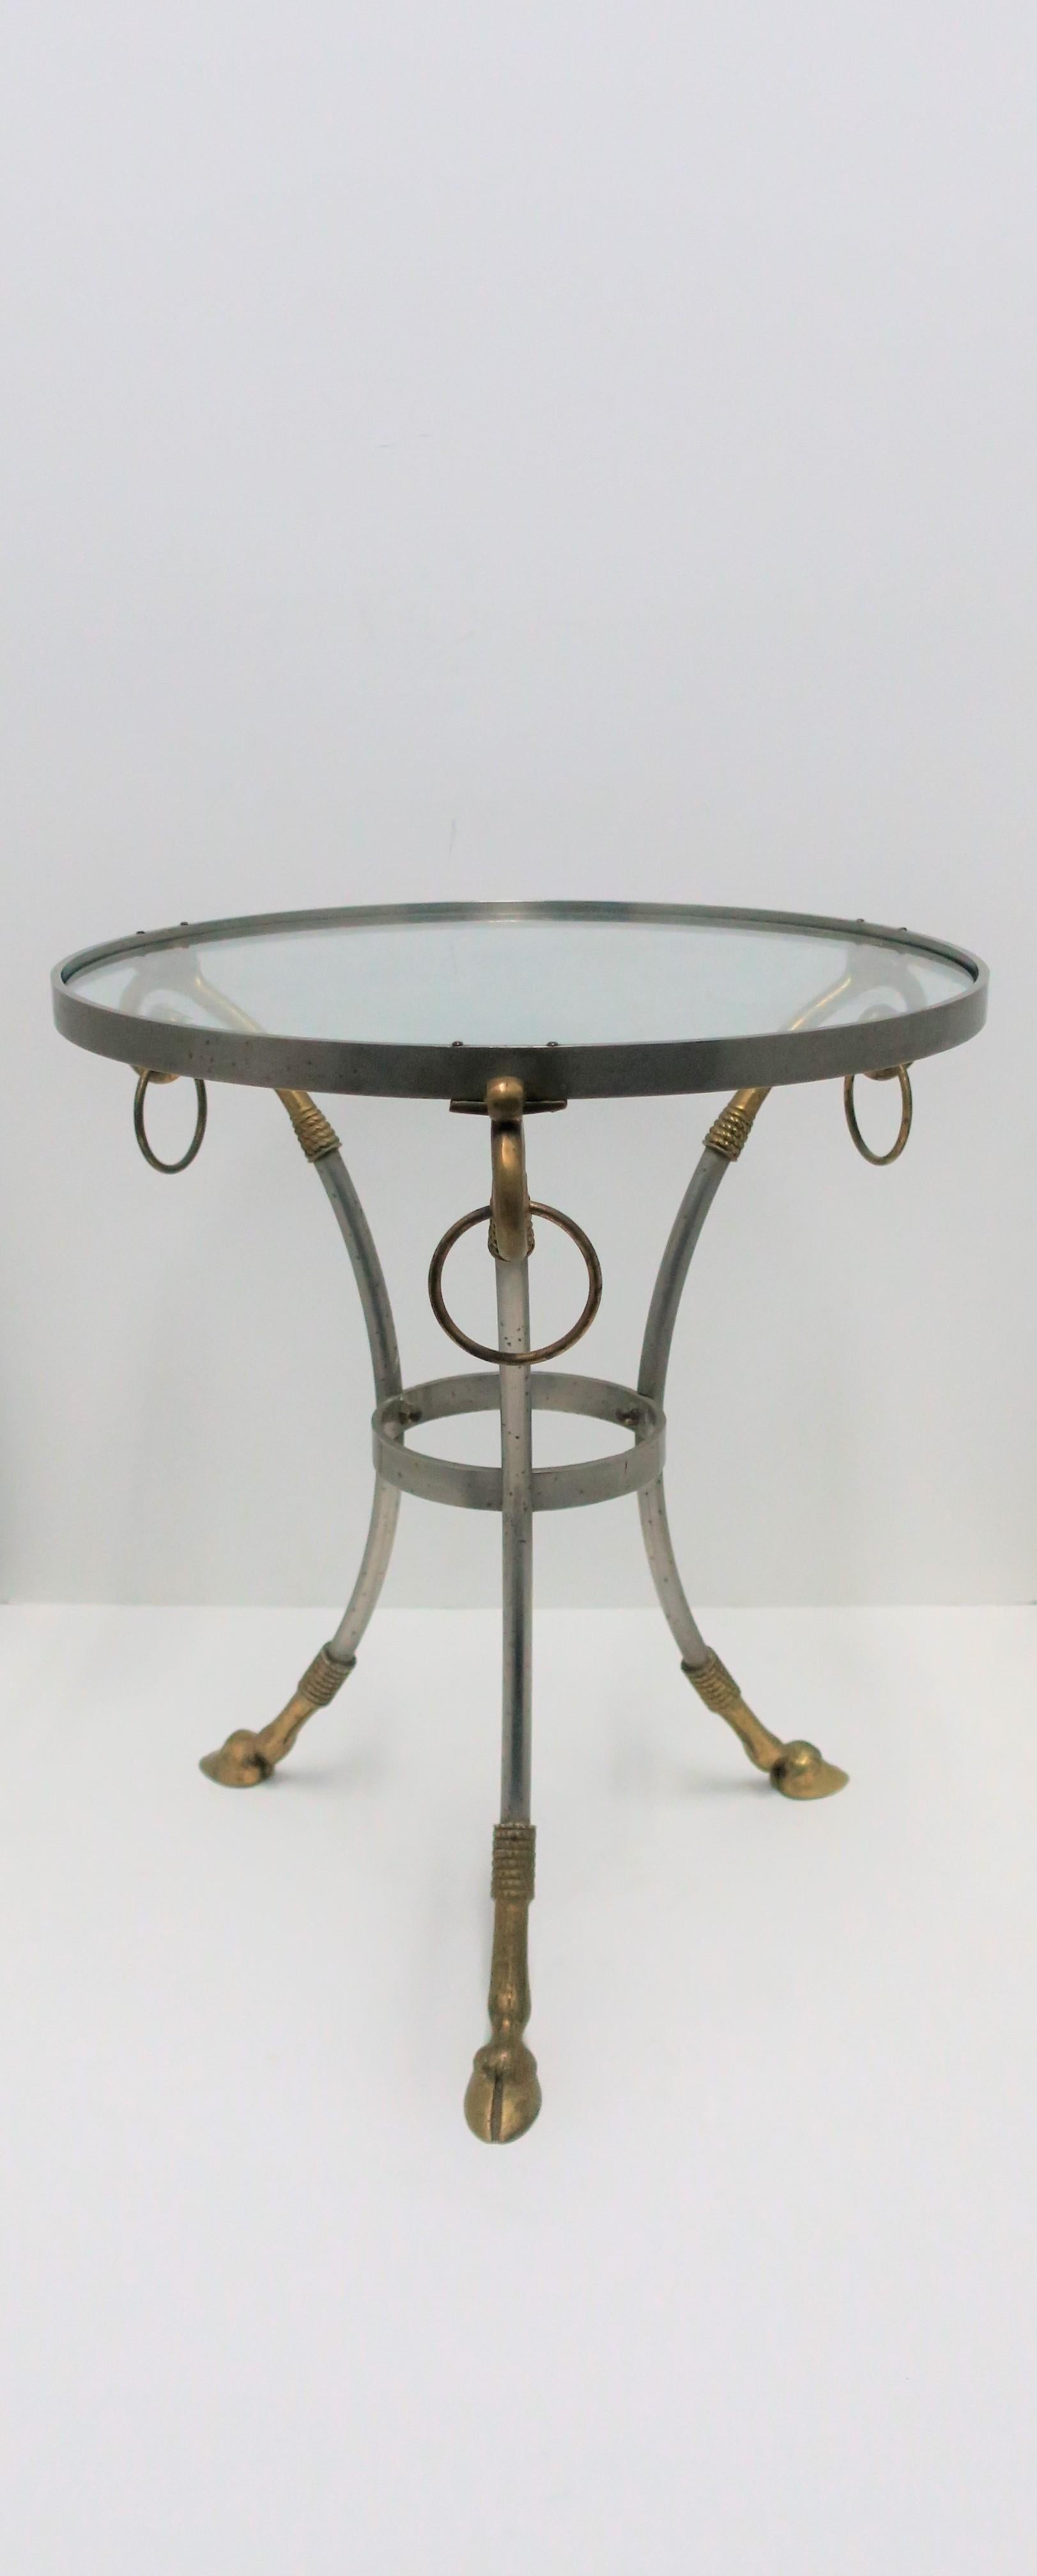 A small and substantial French Gueridon round side or drinks table with brass rams head hoof detailing, in the style of designer Maison Jansen, circa 20th century, France. Table is matte steel and brass with brass loop/ring detail at top, hoof/legs